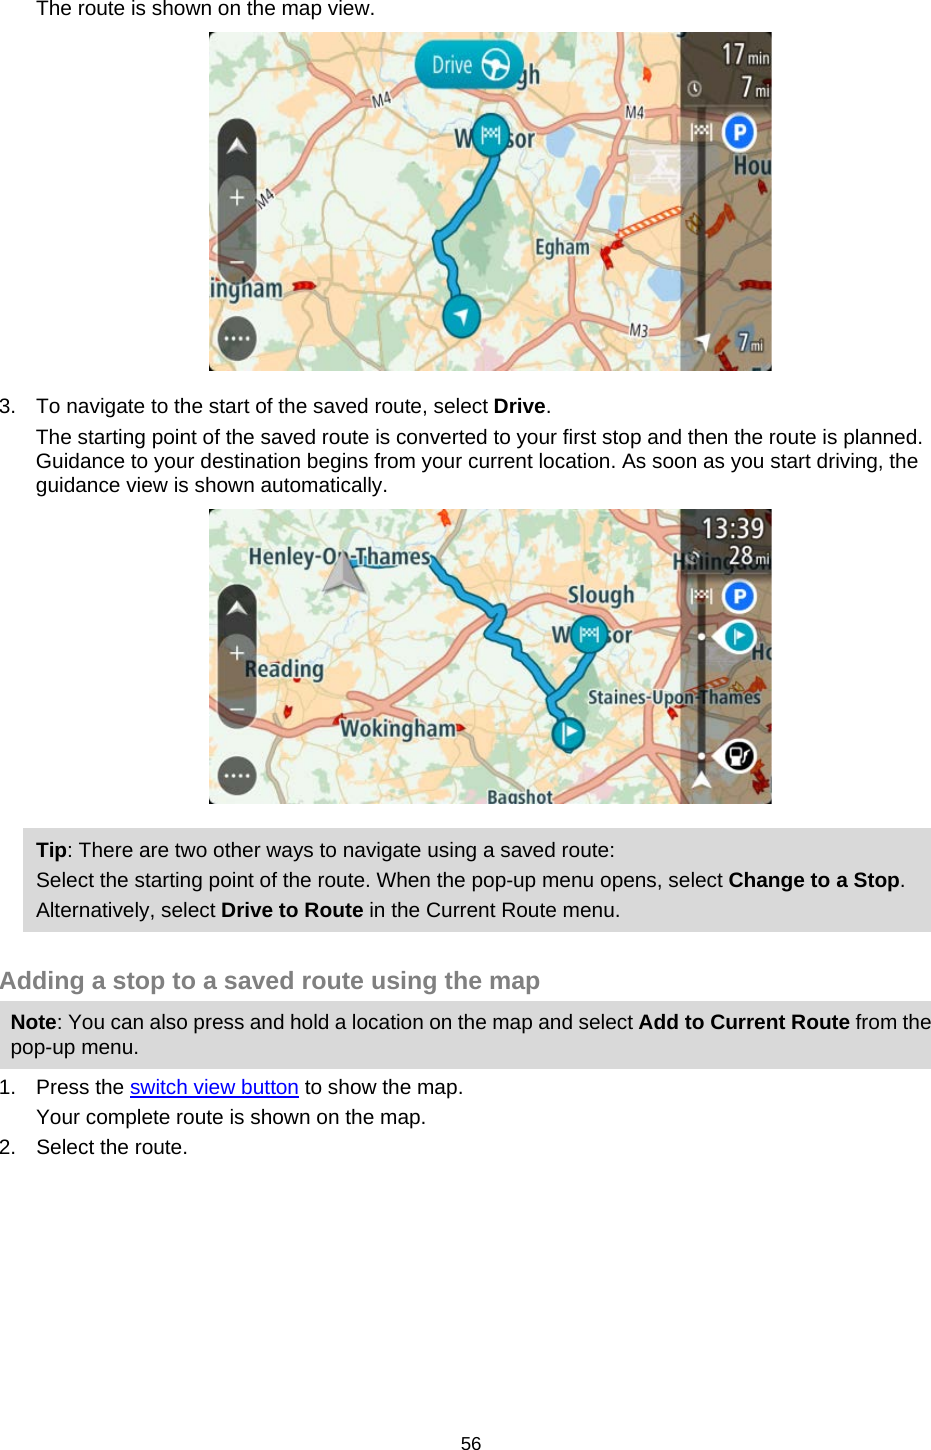  The route is shown on the map view.  3. To navigate to the start of the saved route, select Drive. The starting point of the saved route is converted to your first stop and then the route is planned. Guidance to your destination begins from your current location. As soon as you start driving, the guidance view is shown automatically.  Tip: There are two other ways to navigate using a saved route: Select the starting point of the route. When the pop-up menu opens, select Change to a Stop. Alternatively, select Drive to Route in the Current Route menu.  Adding a stop to a saved route using the map Note: You can also press and hold a location on the map and select Add to Current Route from the pop-up menu. 1. Press the switch view button to show the map. Your complete route is shown on the map. 2. Select the route. 56   